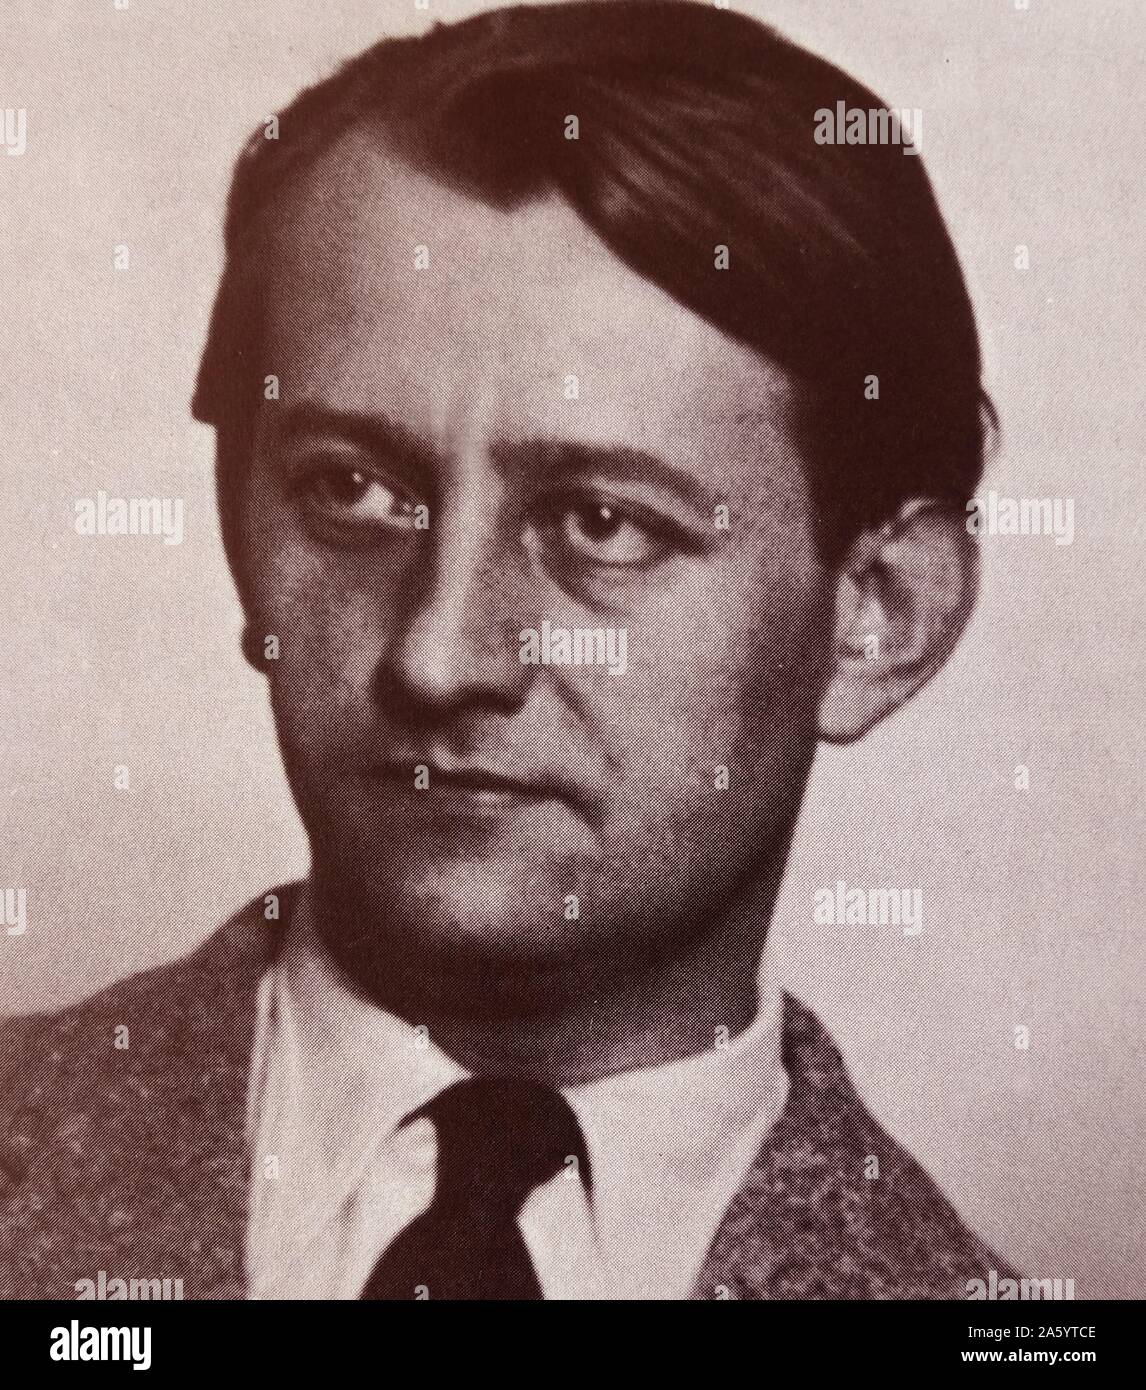 André Malraux (1901 – 1976) French novelist and Minister for Cultural Affairs. He was appointed by President Charles de Gaulle as Minister of Information (1945–1946) and subsequently as France's first Minister of Cultural Affairs during de Gaulle's presidency (1959–1969). Stock Photo